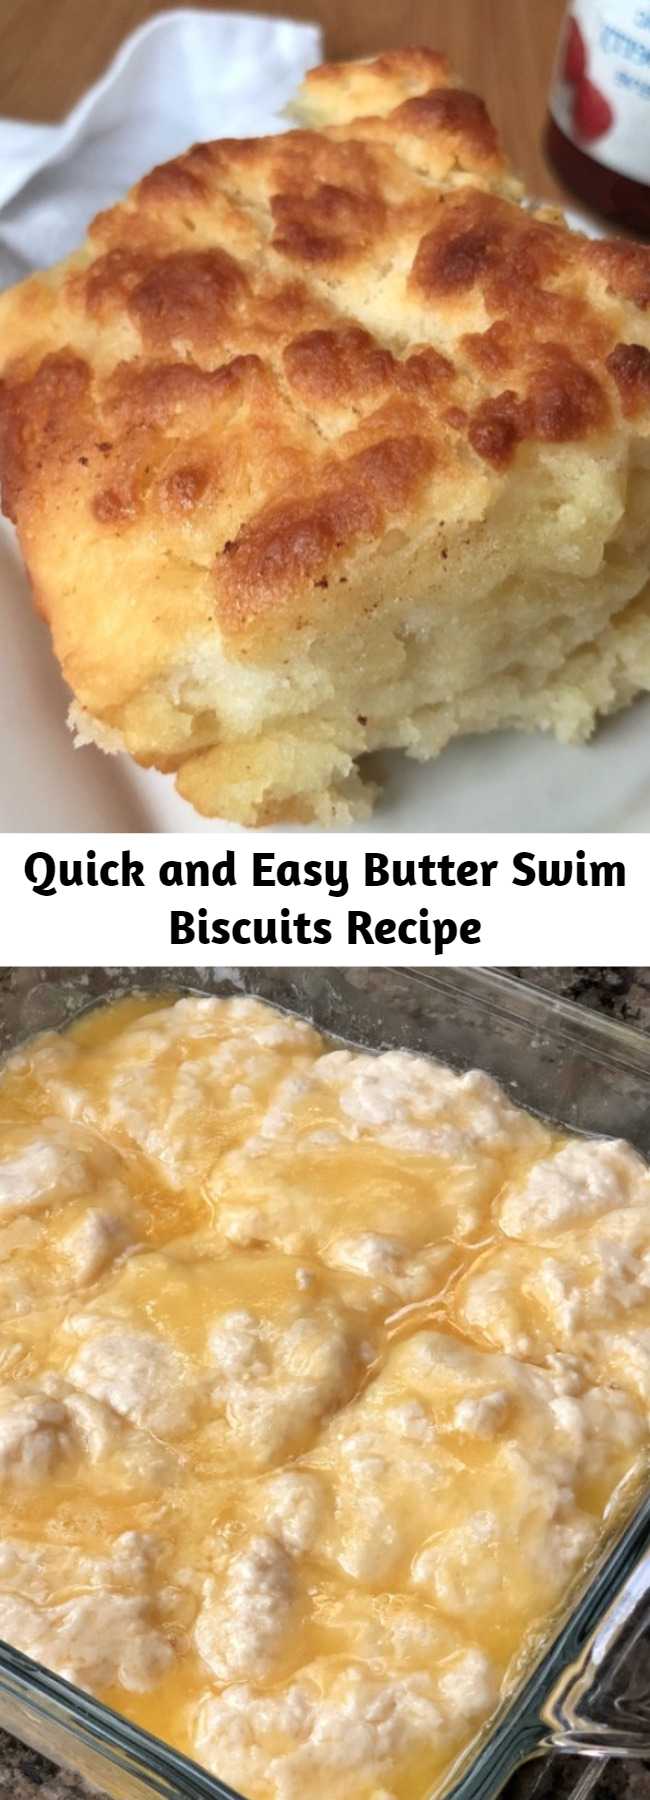 Quick and Easy Butter Swim Biscuits Recipe - This simple homemade recipe is TO DIE FOR! The butter makes these biscuits soft and moist on the inside, with a flaky crust on the outside. Add a little jam or jelly, and you've got heaven.